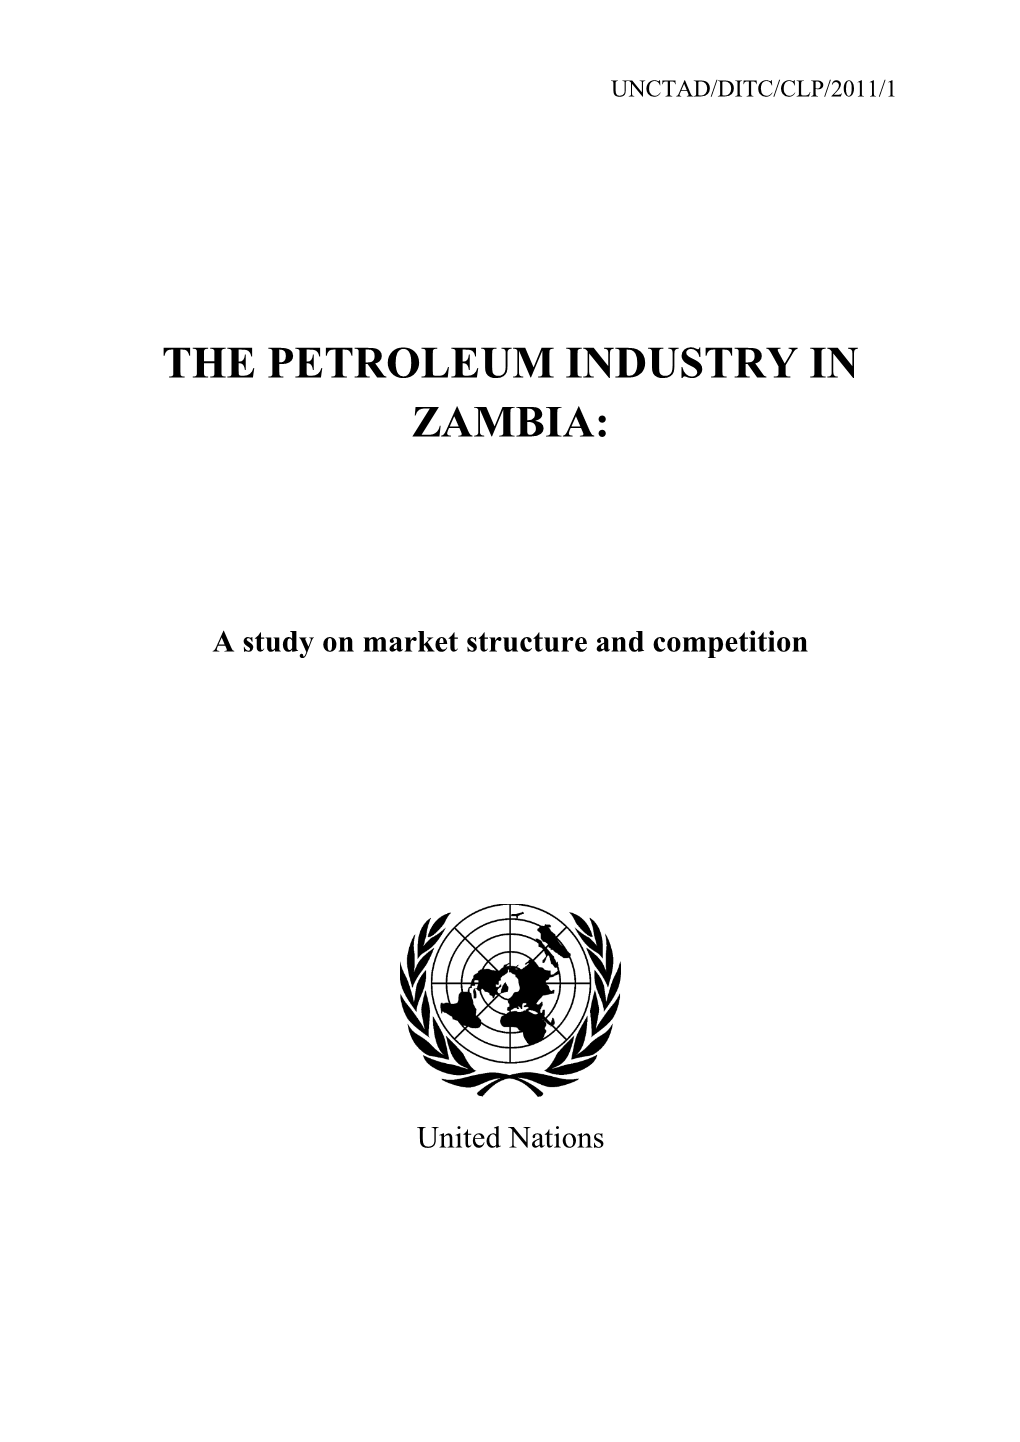 The Petroleum Industry in Zambia